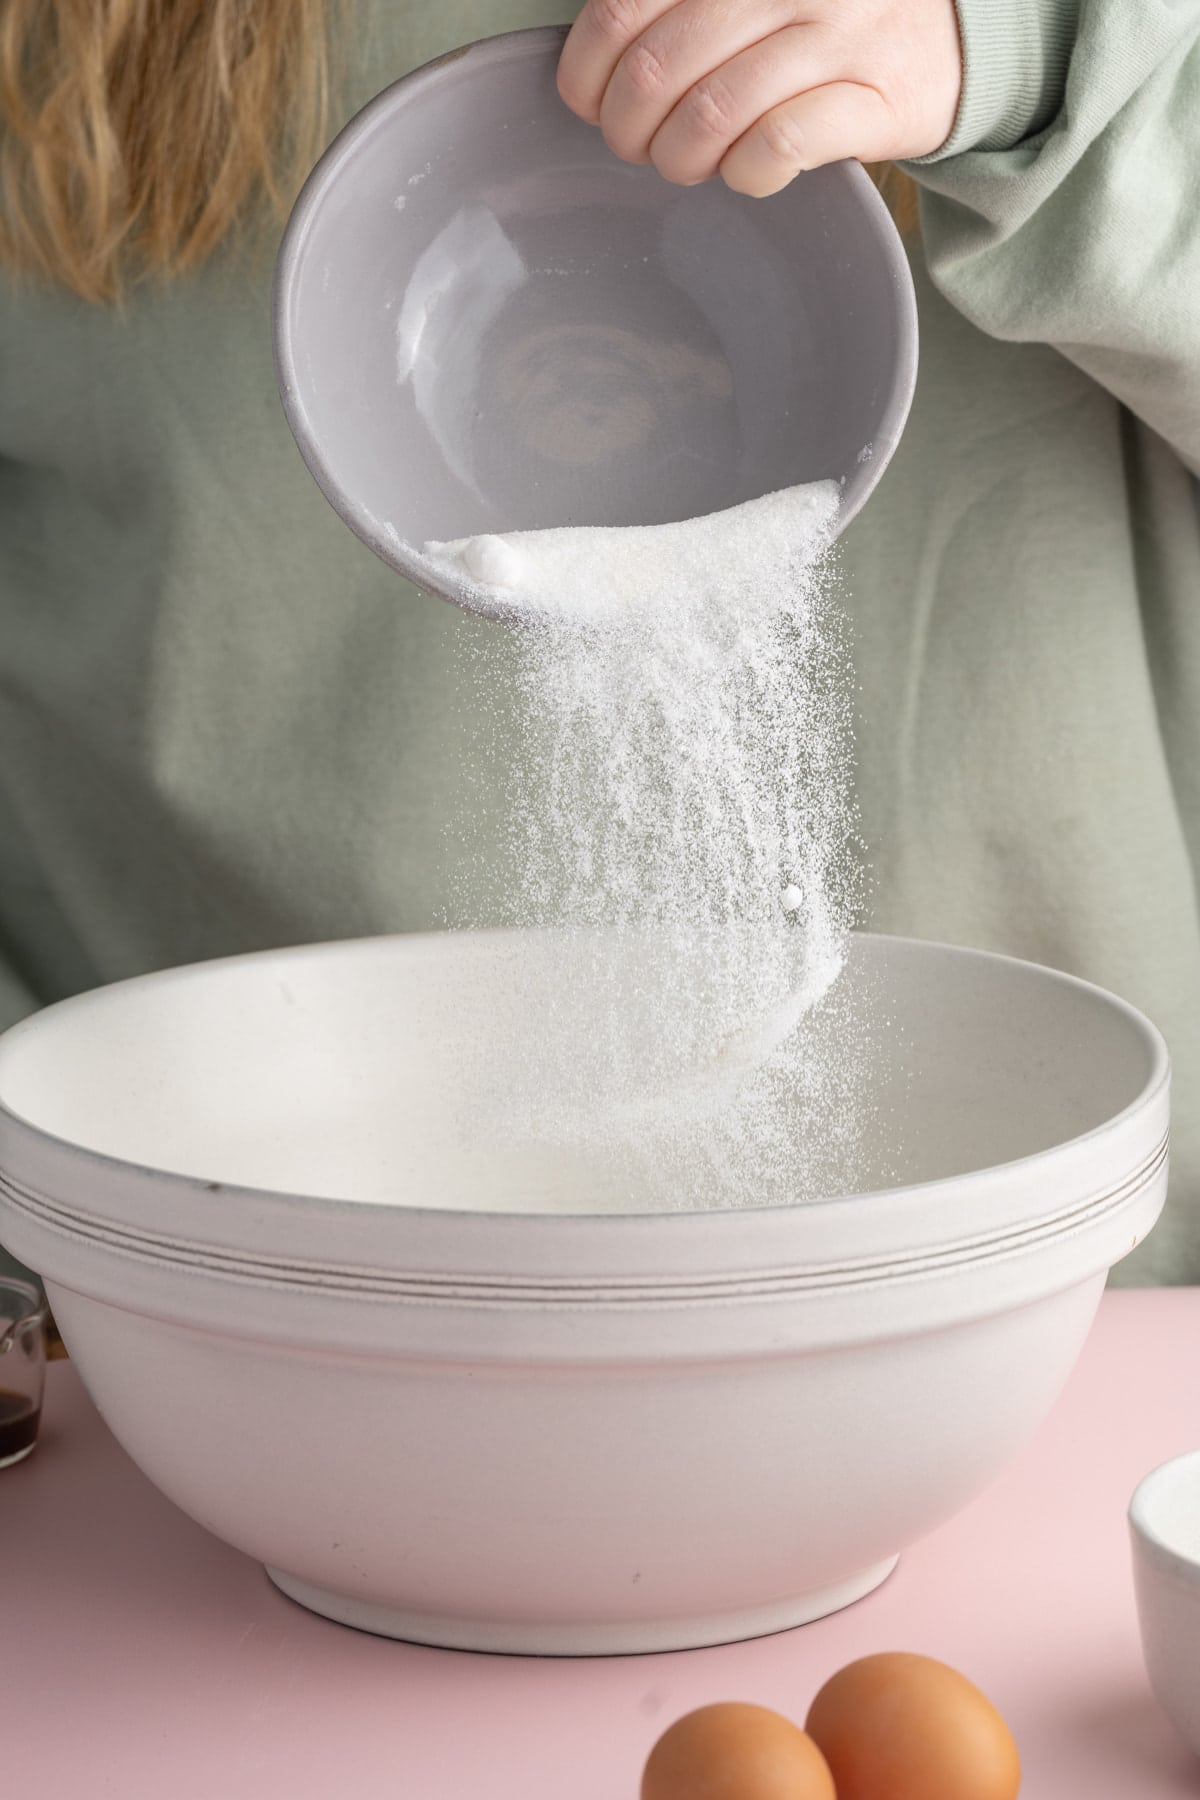 Adding granulated sugar to a bowl to make brownie batter